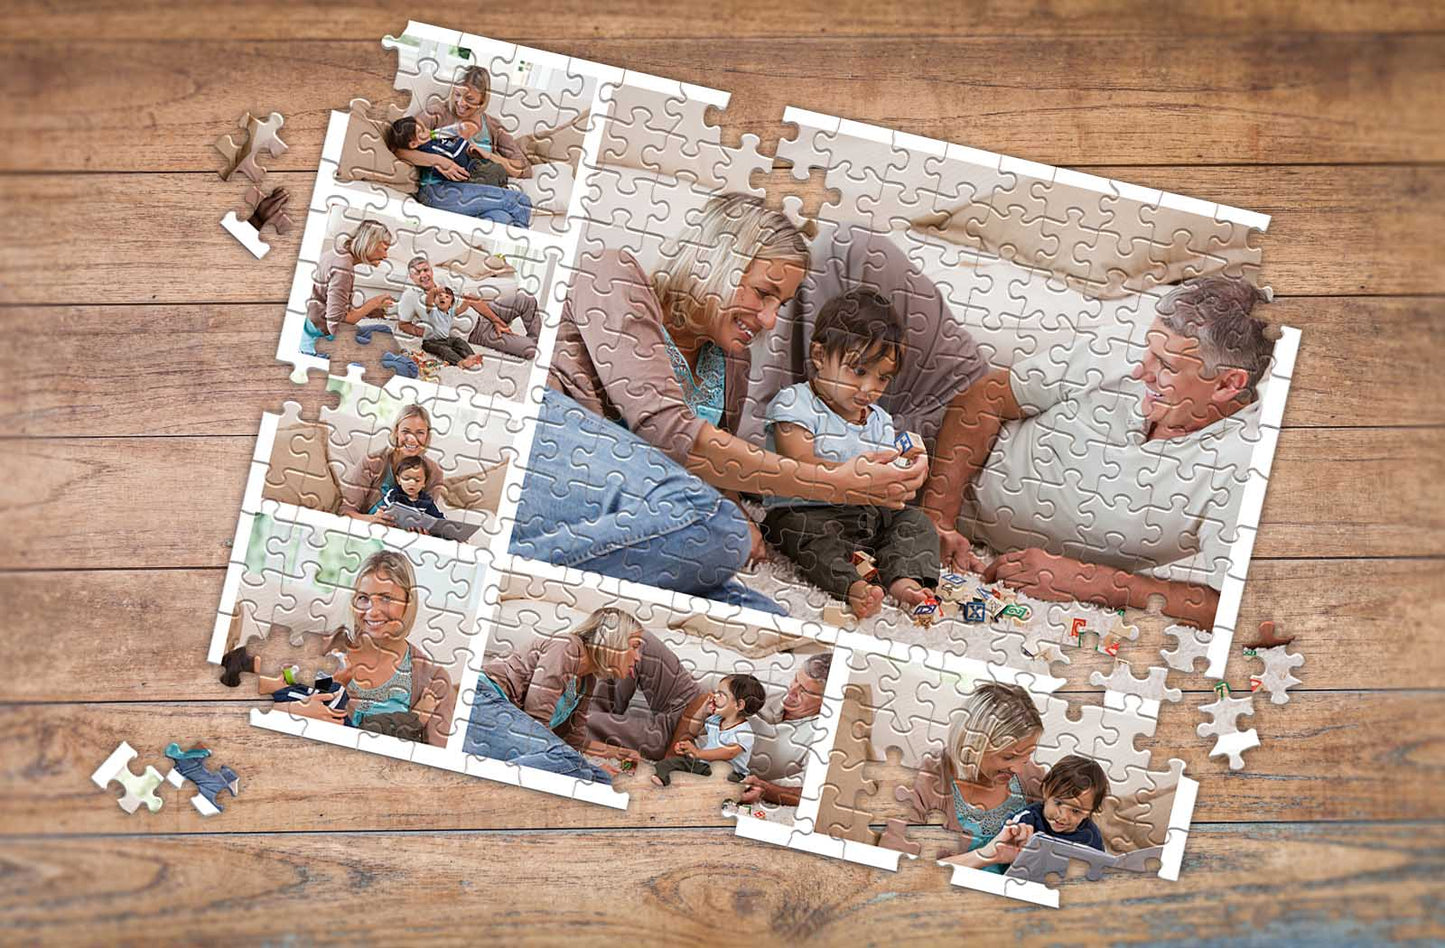 252 Piece Photo Collage Puzzle with parents and young child - Premium Collage Photo Puzzles Made in the USA | Make Your Own Puzzle at MakeYourPuzzles